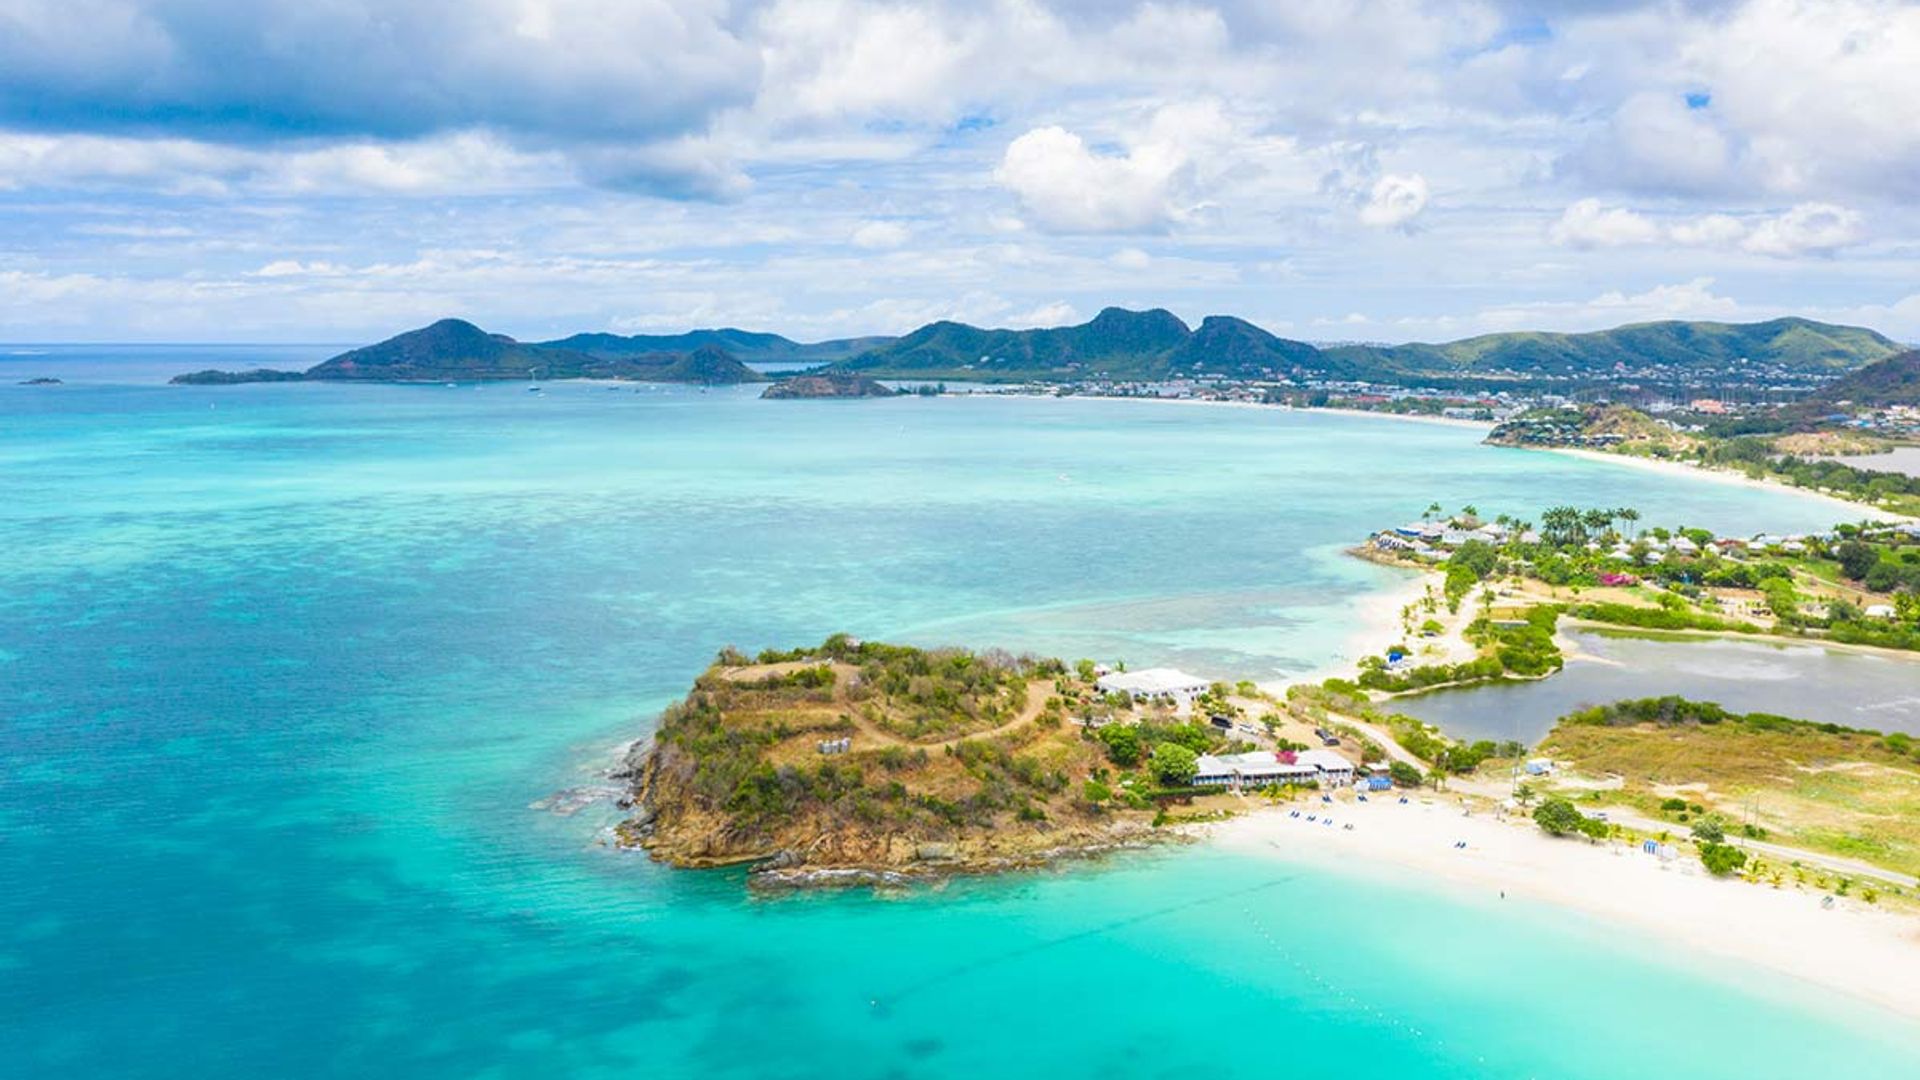 Antigua: Where to stay and what to do on the Caribbean Island